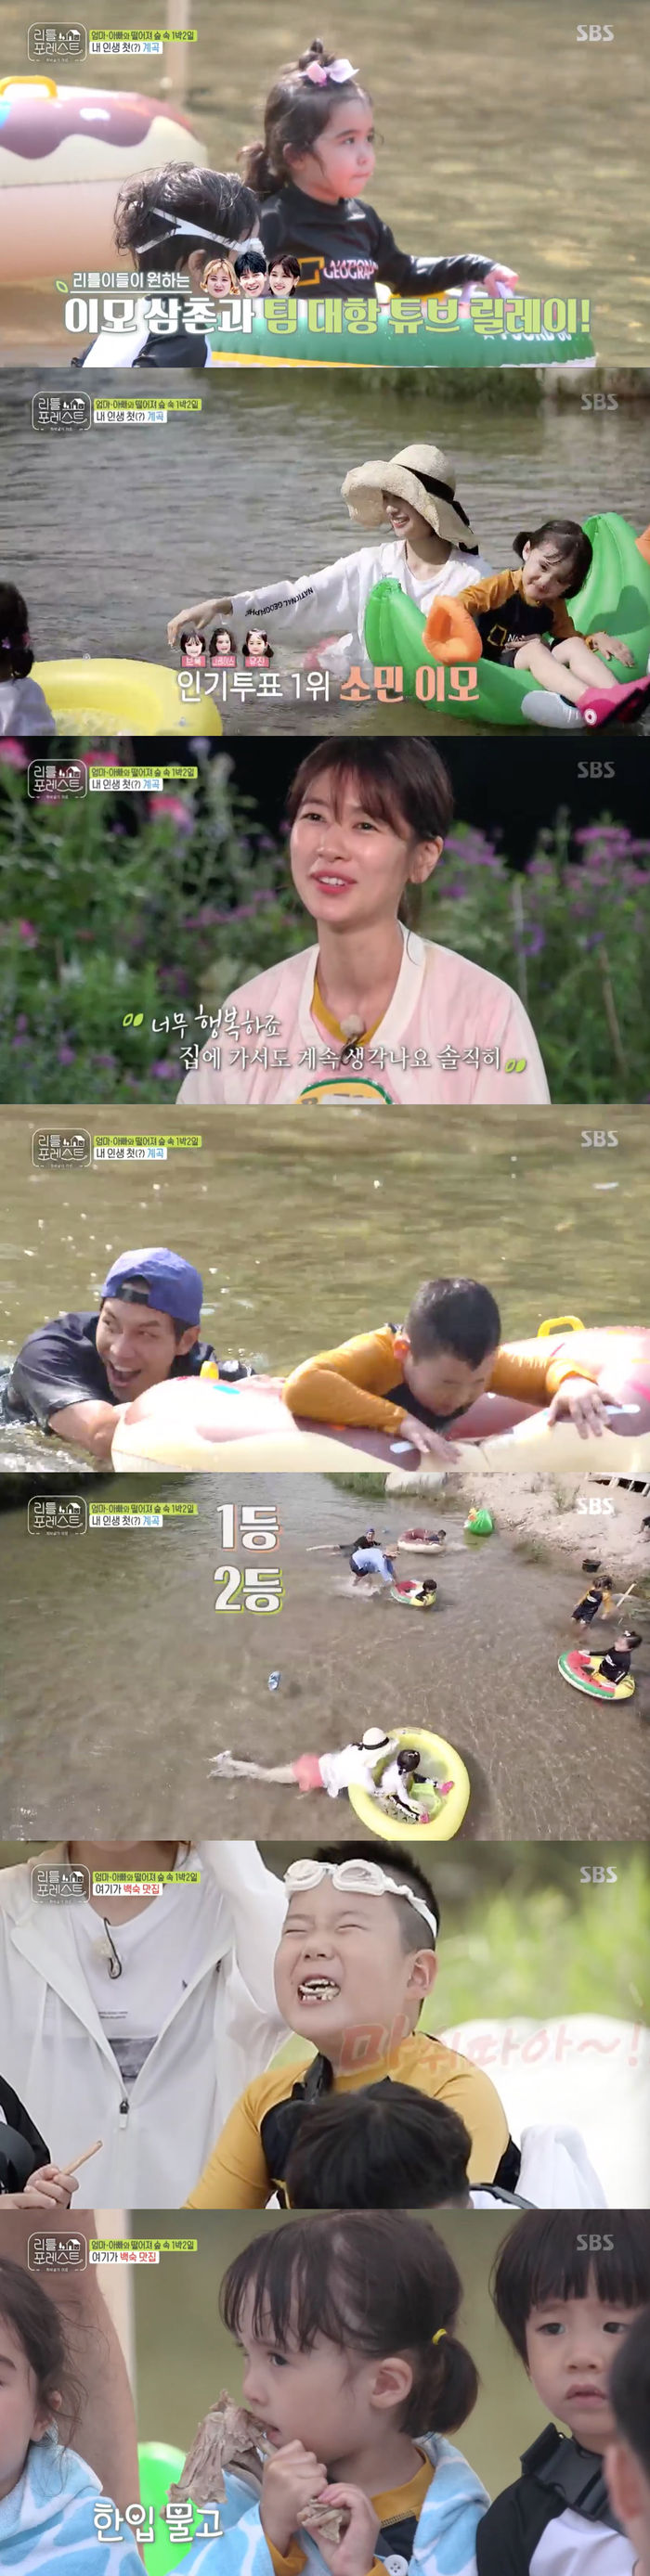 I played a happy water play with Little.On SBS Little Forest broadcasted on the 2nd, Little Lee and team team Tube relay were shown to enjoy.On the day of the broadcast, Lee Seung-gi suggested, Lets play a game like this.Lee Seung-gi then told Little to choose who he wanted to team up with, Park Na-rae and Jung So-min.Lee Han Lee chose Park Na-rae, Kim Jin-hee Lee Seung-gi and Brook Lee Jung So-min.Grace and Eugene each said they wanted to be a team with Jung So-min.Lee Seung-gi and Park Na-rae could not hide their regrets. Jung So-min said, I was a little sorry for my sister.But I was so happy and happy. I went home and I kept thinking. Lee Hyun, who had to do the last line, said, I am me.And Lee suddenly laughed at Park Na-rae, changing his mind to team up with Lee Seung-gi.Eventually Lee Seung-gi and Lee Han and Kim Jin-hee teamed up and Jung So-min and girls teamed up.And Park Na-rae teamed up with Lee Hyun to start the relay game.And the relays final win was the Lee Seung-gi team, and the Jung So-min team, which received the most Choices, came in first place and caught the eye.After the water play, Little Lee ate the white rice made by Seojin The Uncle and Narae aunt.In particular, Lee Han-yi showed a bold Mukbang with a chicken leg in one hand, which made Littles envy.Brooke, who was watching this, also showed off her bare hands Mukbang, who held up a chicken leg with fern-like hands and challenged her to tear a chicken leg the size of her face.Lee Seo-jin looked at it with a smile, saying, Brook also eats.On the other hand, in the water play that followed, Lee Han made concessions for his brother, making the hearts of The Uncle and aunts happy.